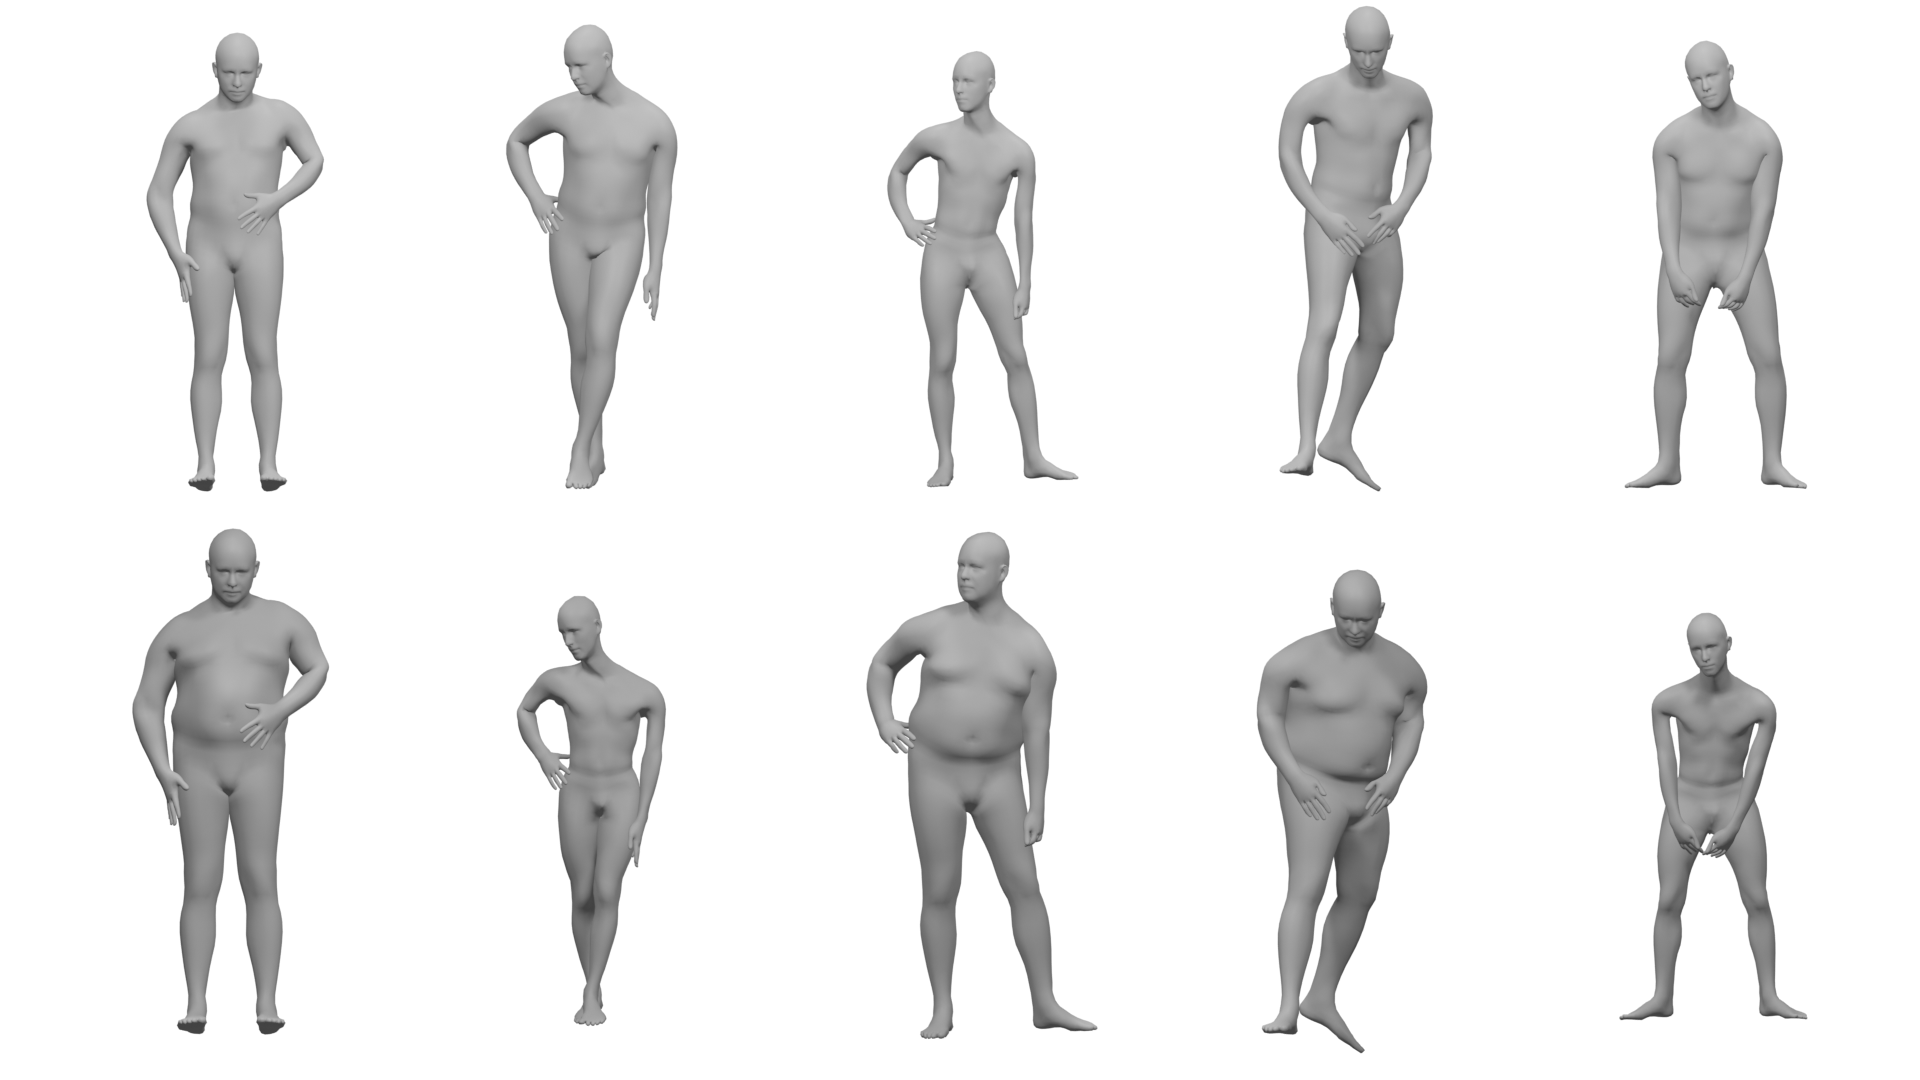 Human characters with varying morphologies performing poses with several self-contacts. Characters with similar poses but different body shapes (columns) can have slightly different spatial relationships between body segments, in particular self-contacts (e.g., contact between the left arm and the flank appearing for the middle characters). In this work  we explore which self-contacts are important to the meaning of the pose independently from other parameters such as body shape.